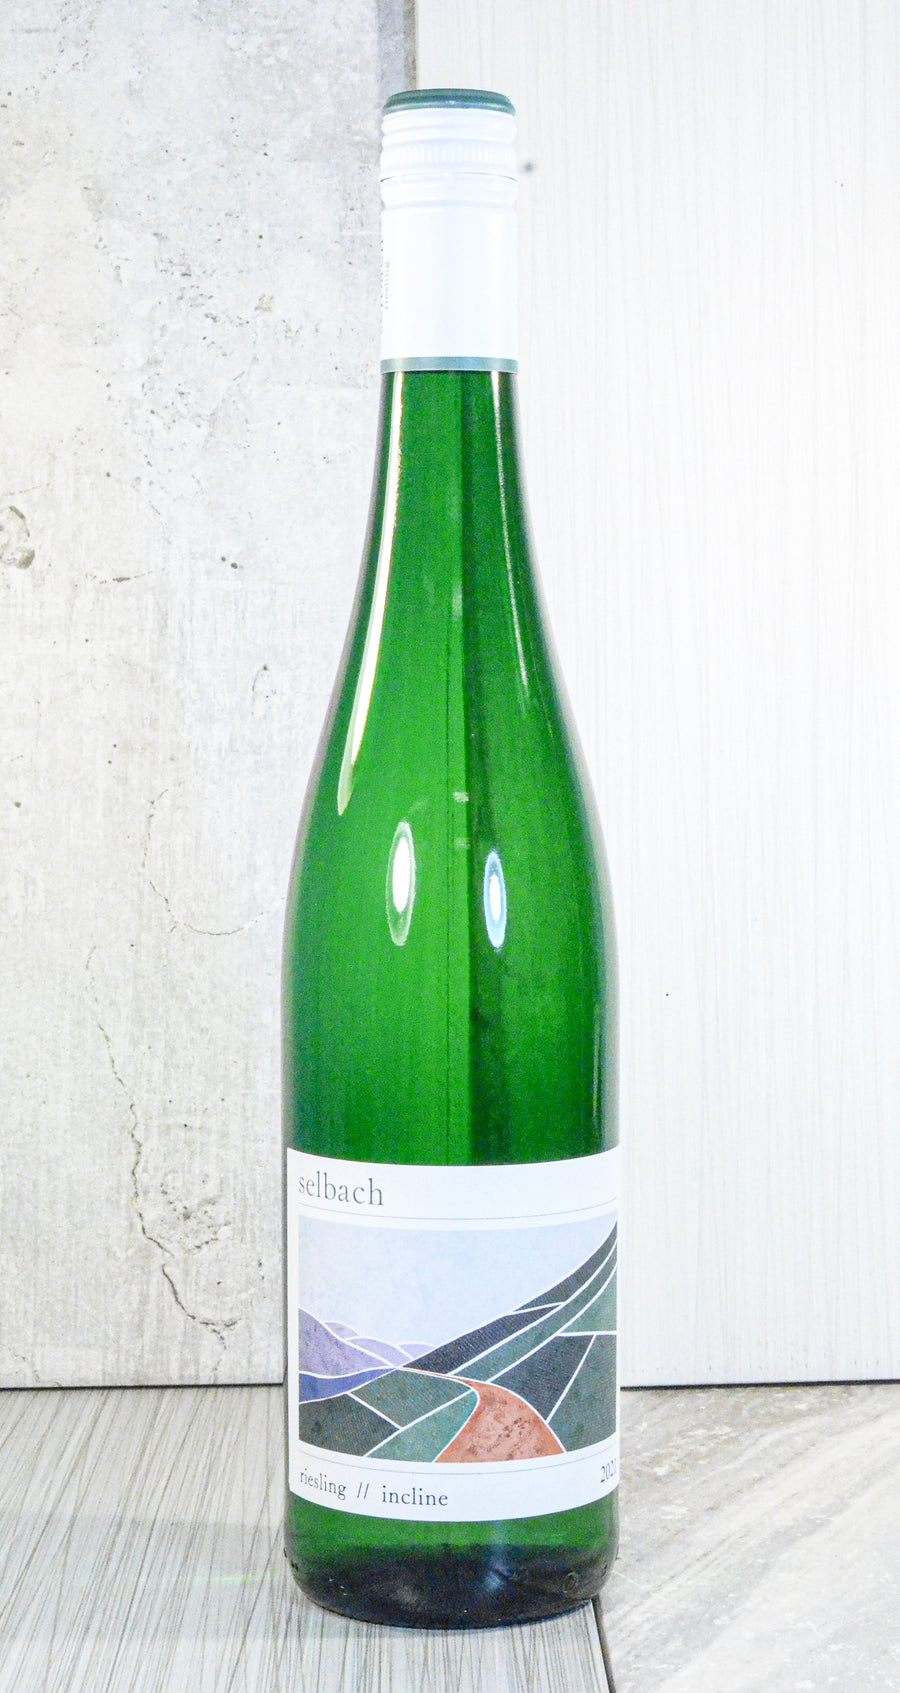 Selbach, Riesling Incline 2021